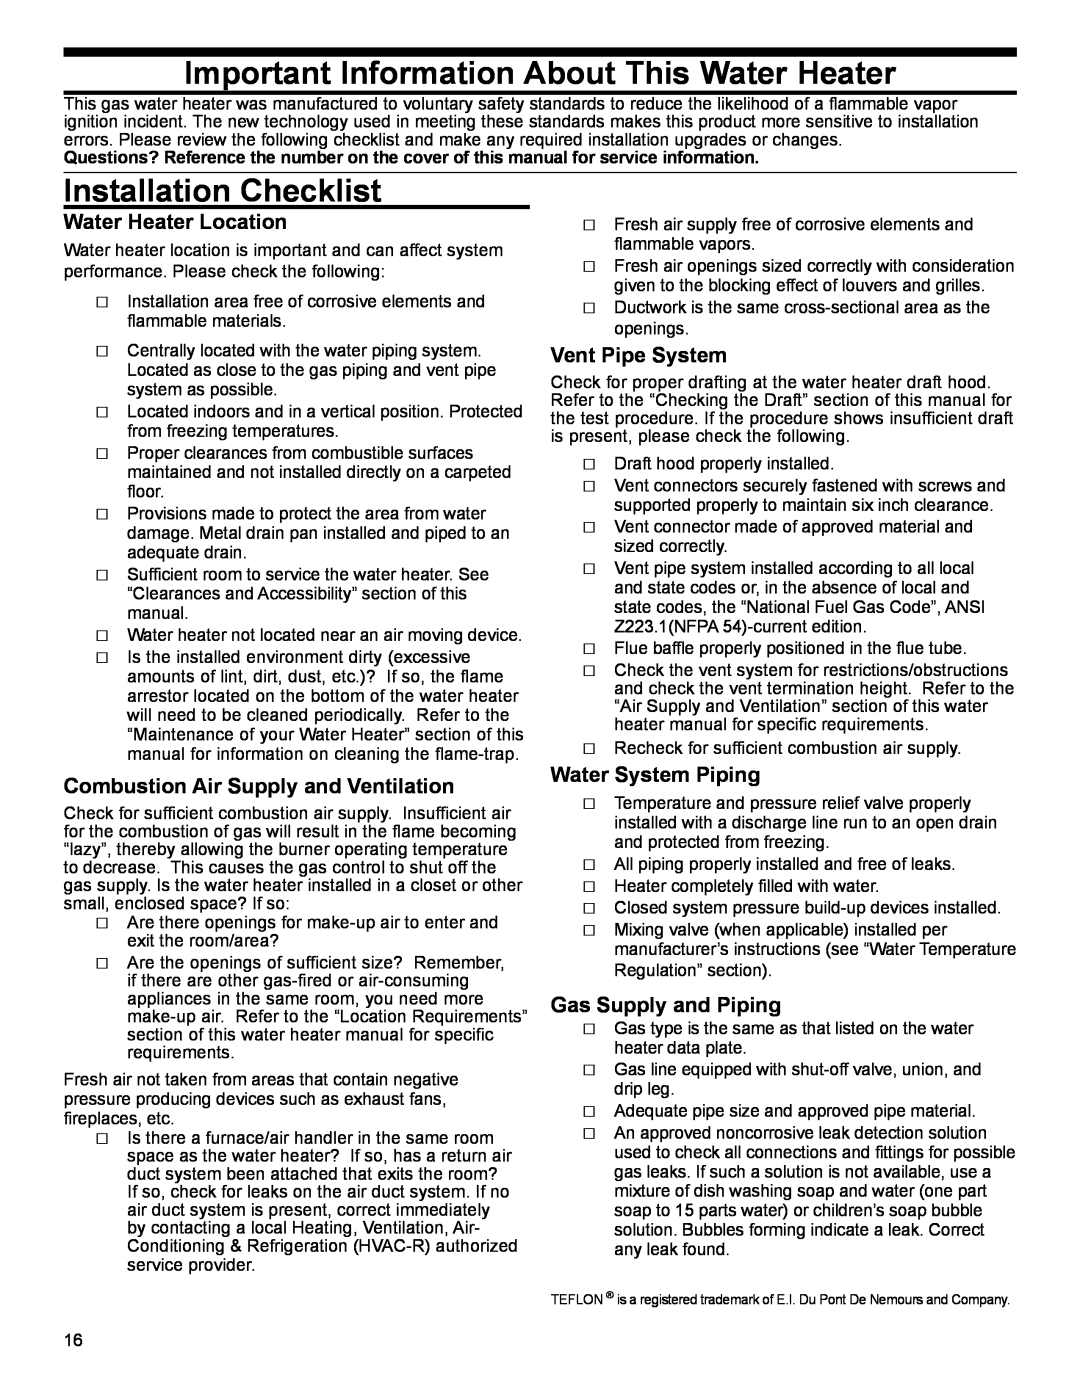 American Water Heater 318935-003 Installation Checklist, Water Heater Location, Combustion Air Supply and Ventilation 